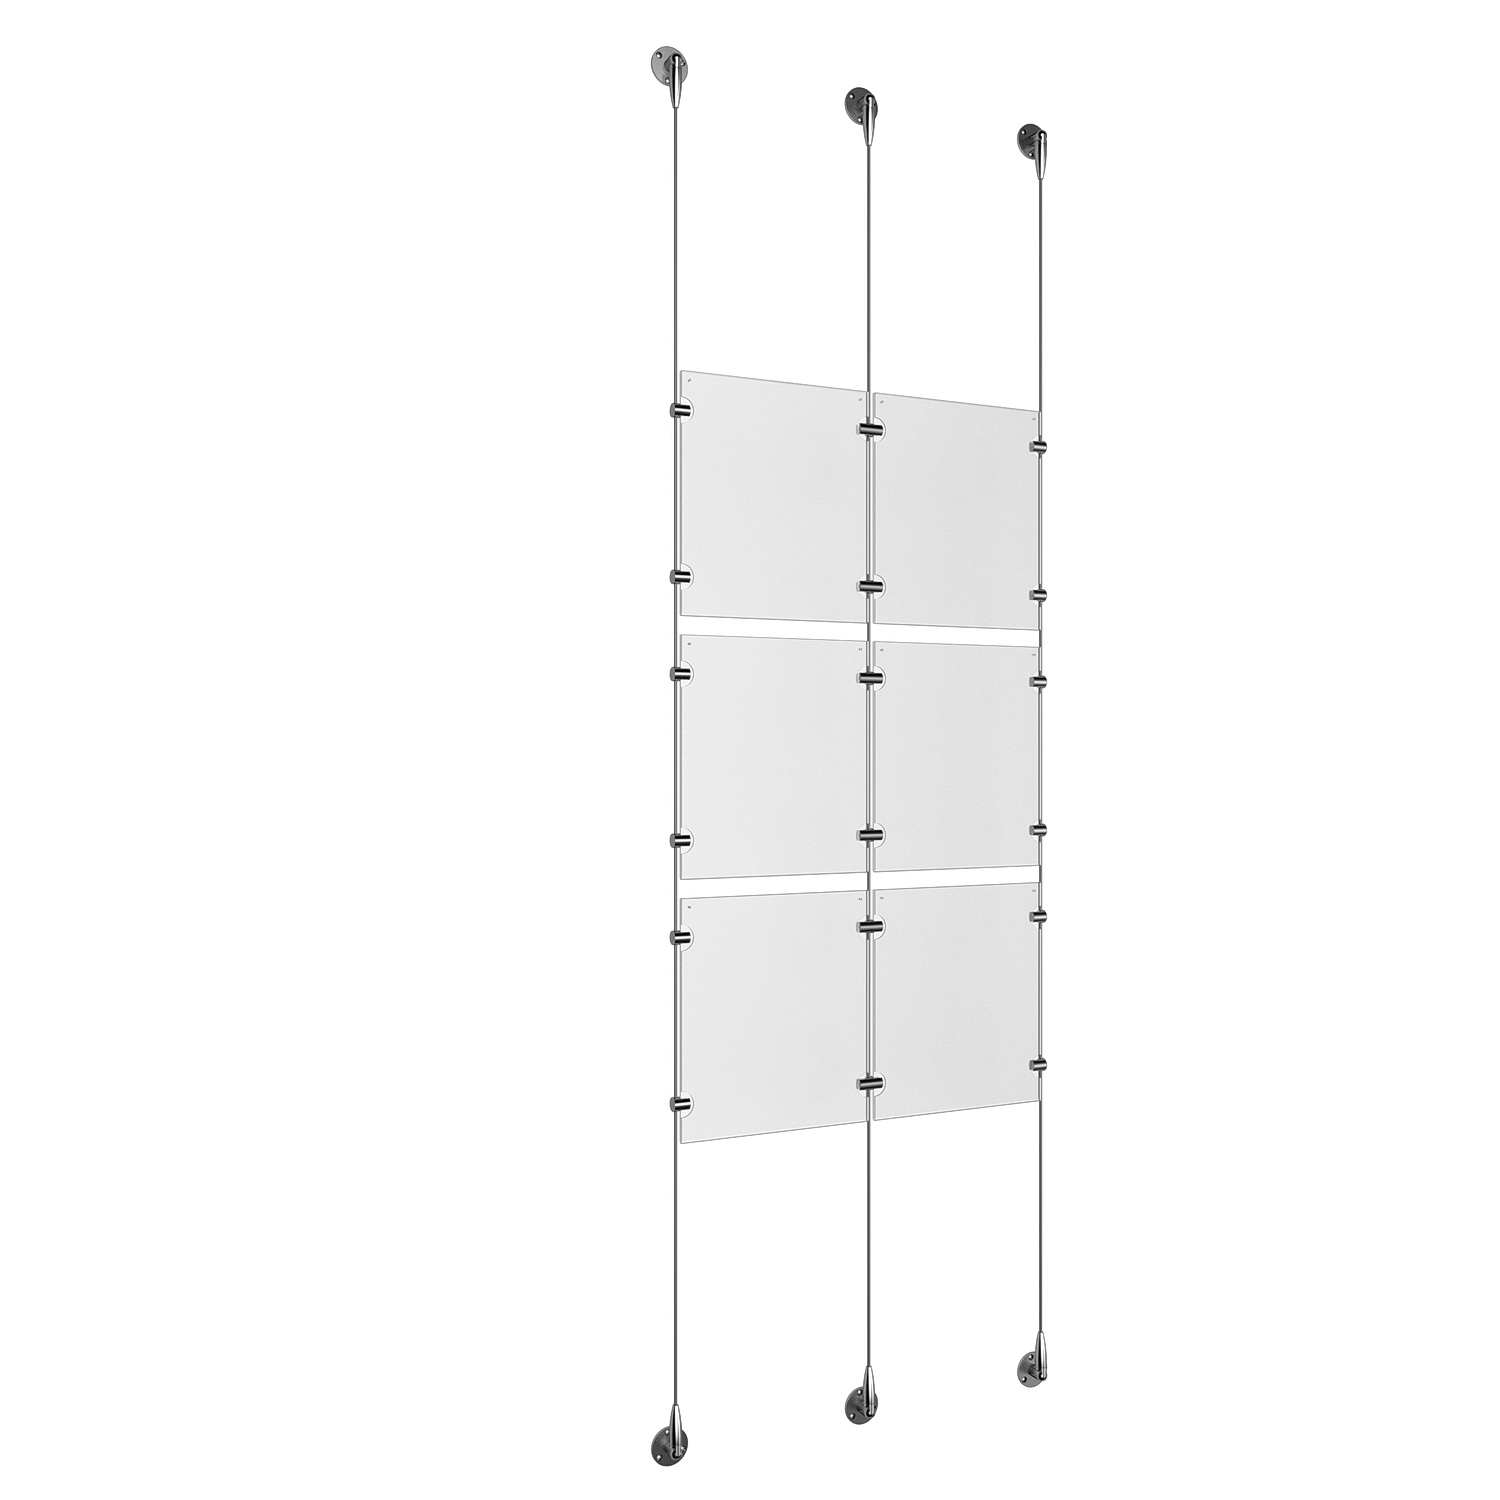 (6) 8-1/2'' Width x 11'' Height Clear Acrylic Frame & (3) Stainless Steel Satin Brushed Adjustable Angle Signature 1/8'' Cable Systems with (12) Single-Sided Panel Grippers (6) Double-Sided Panel Grippers